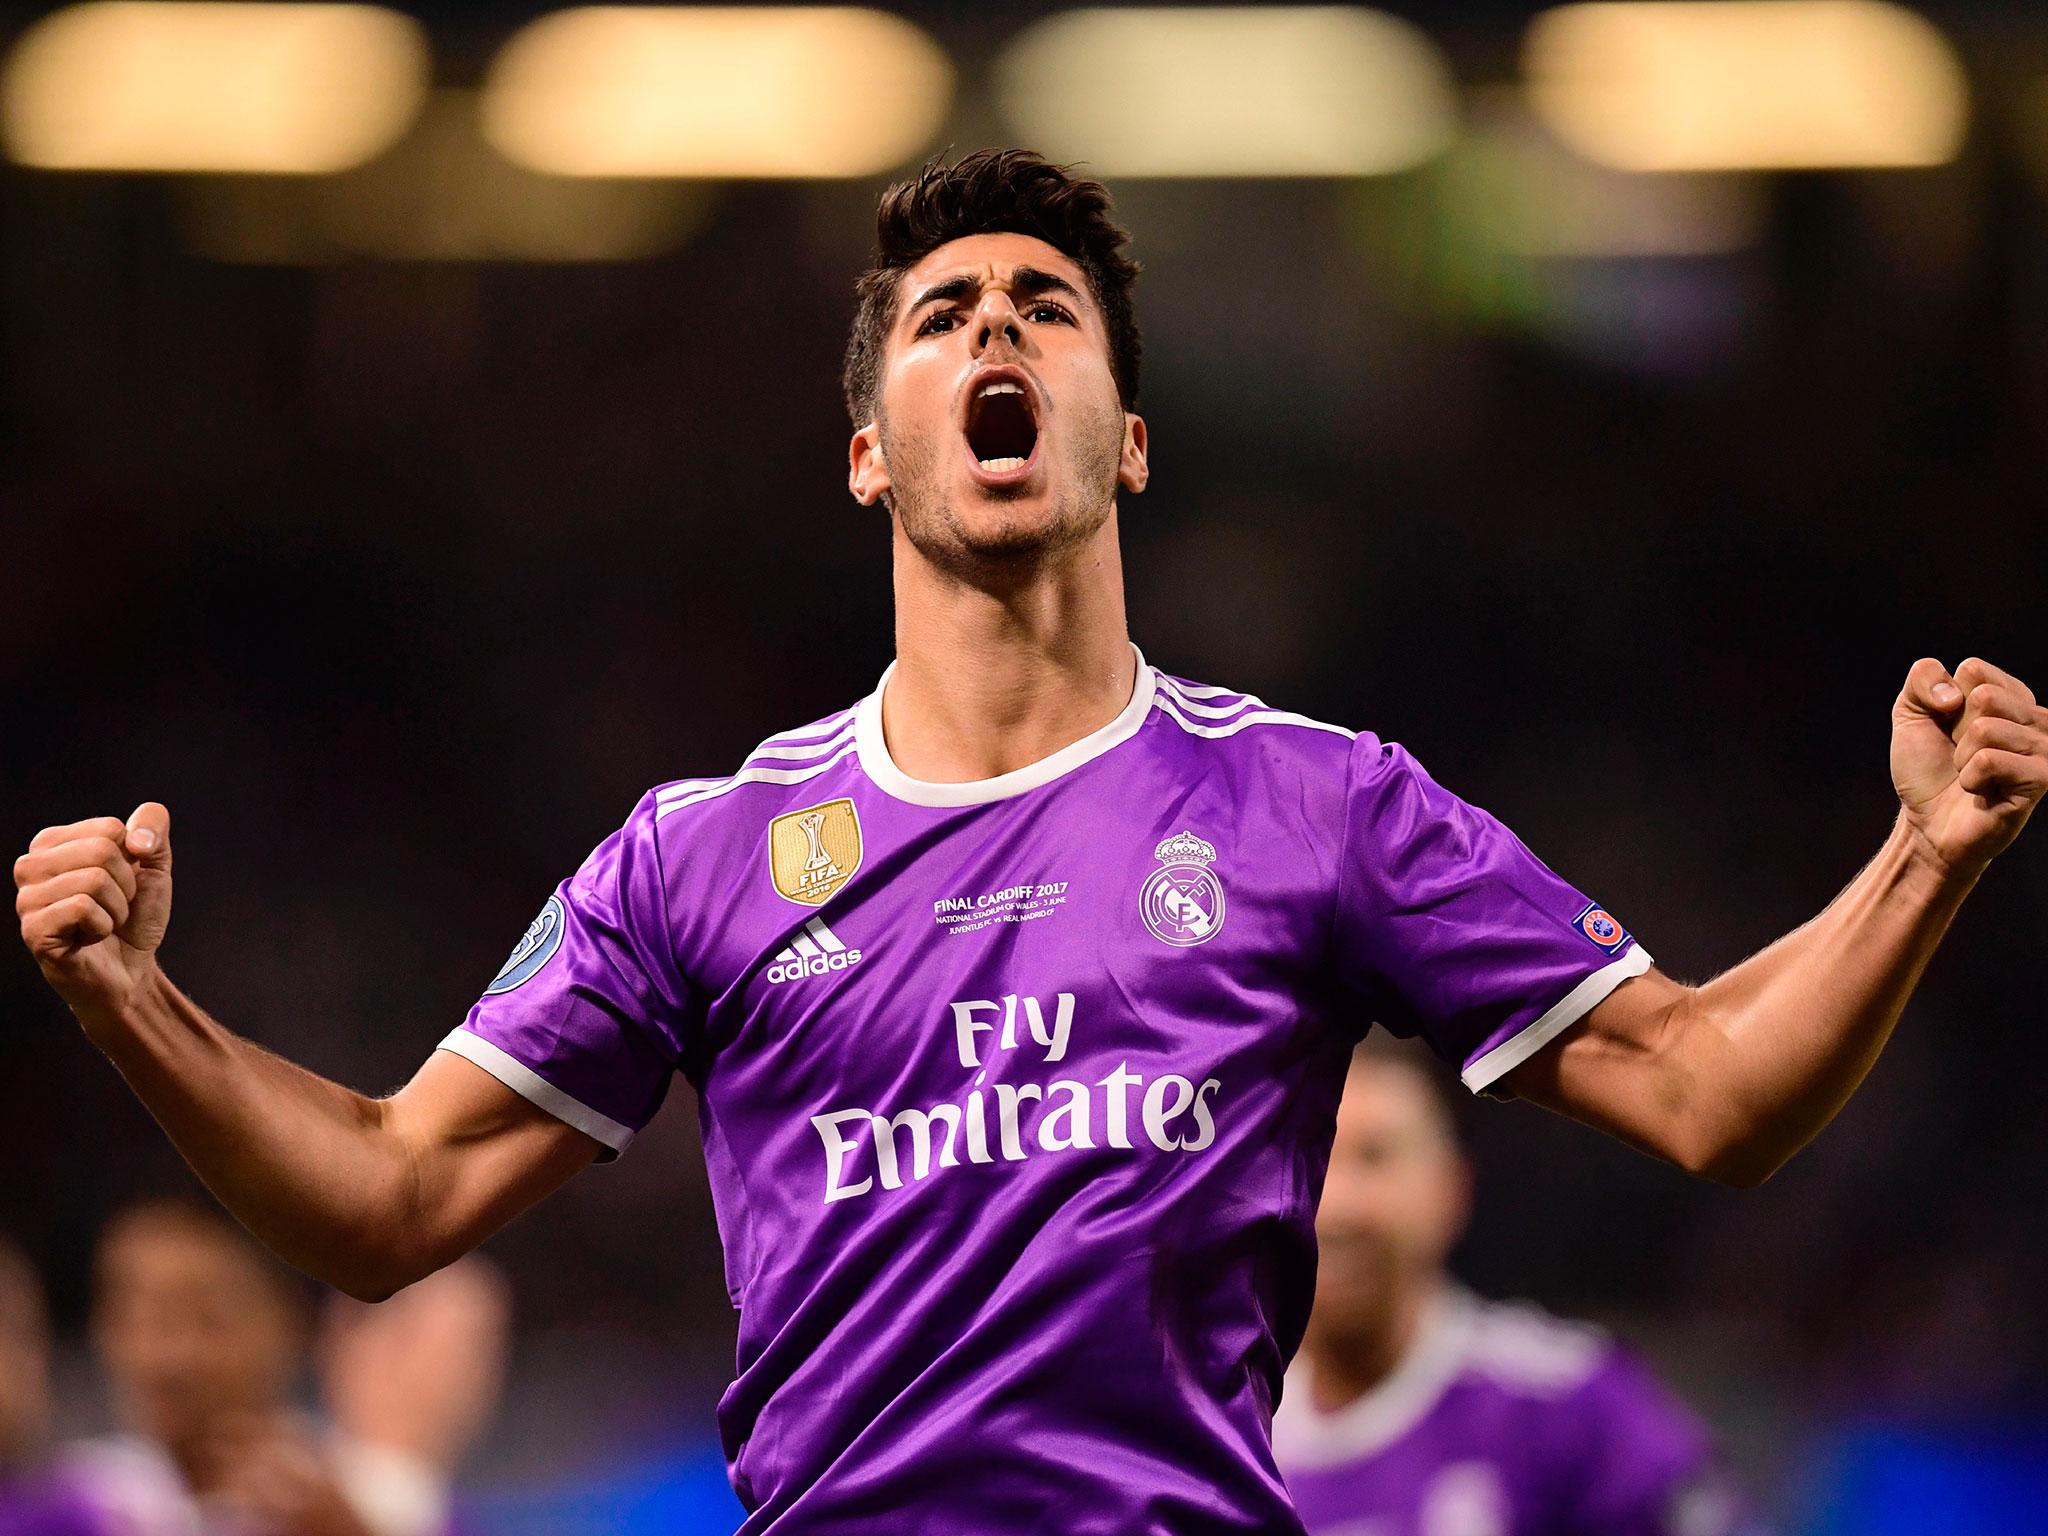 At 21, Marco Asensio has already shown he is ready for the main stage